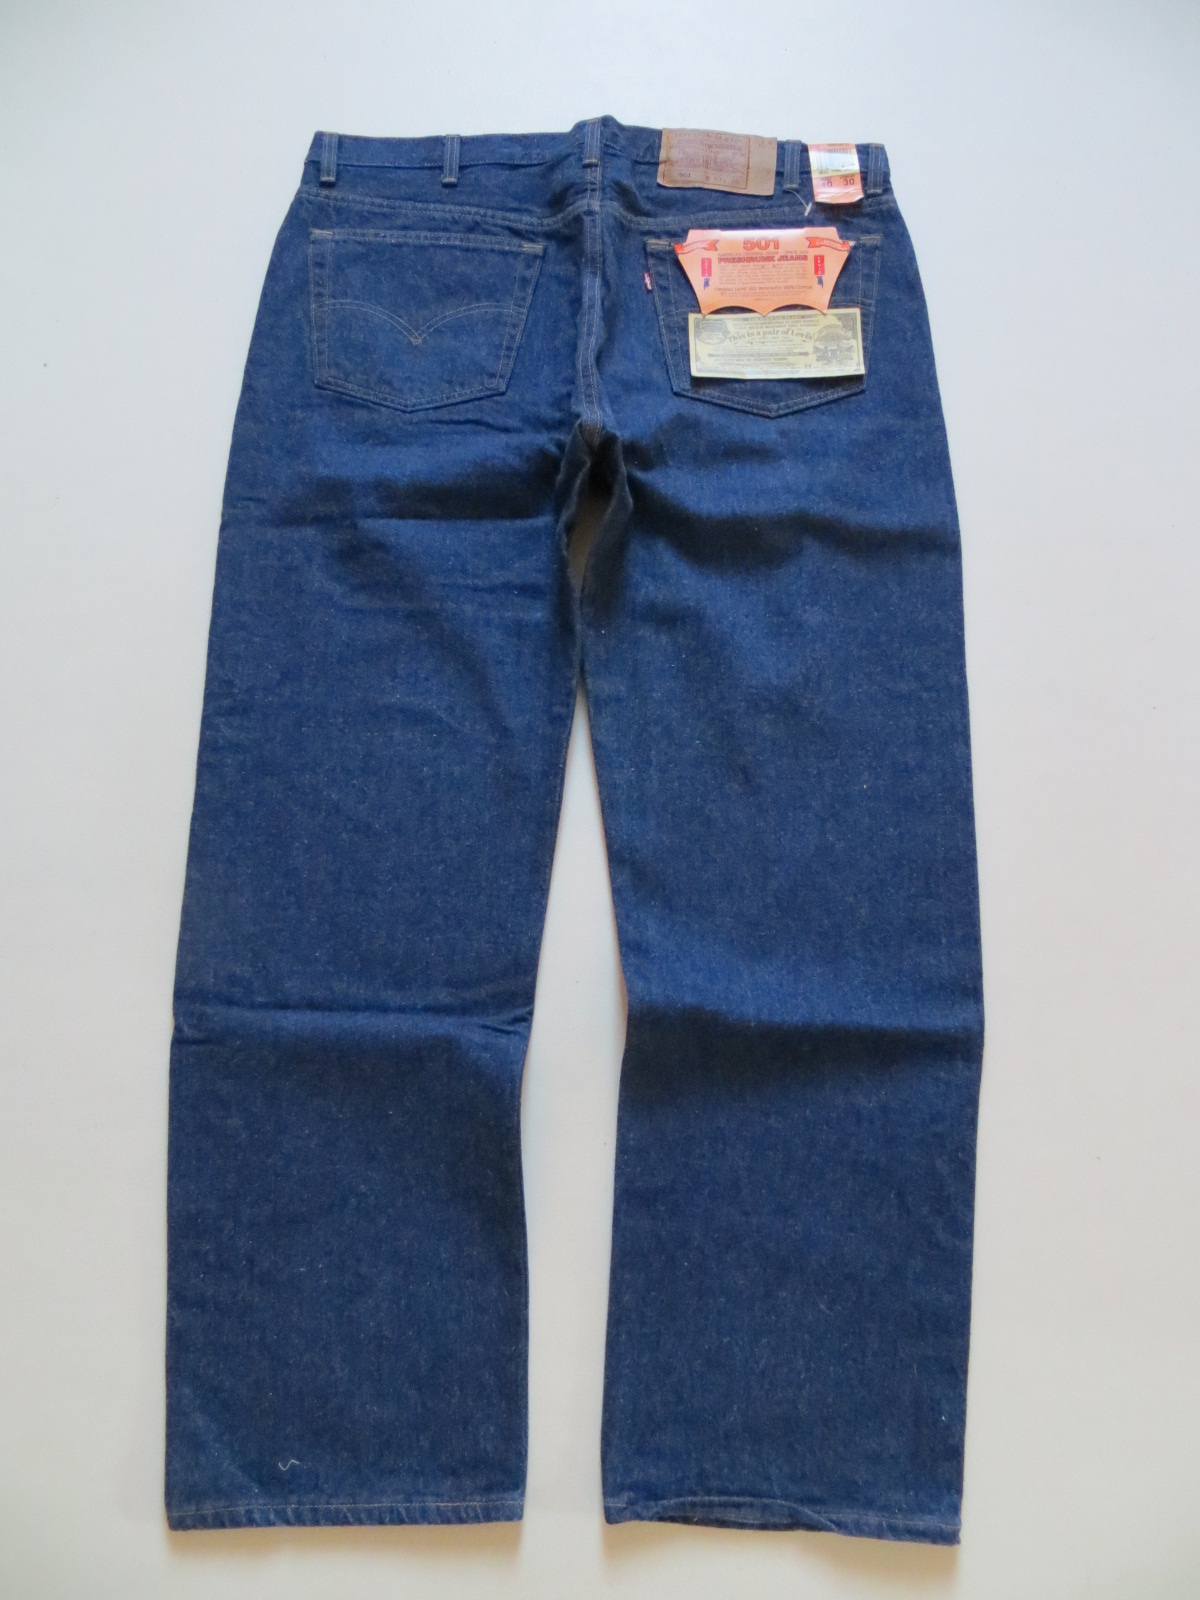 Levi's 501 Mens Jeans Trousers W 40/L 30, NEW! Old School Denim! made ...